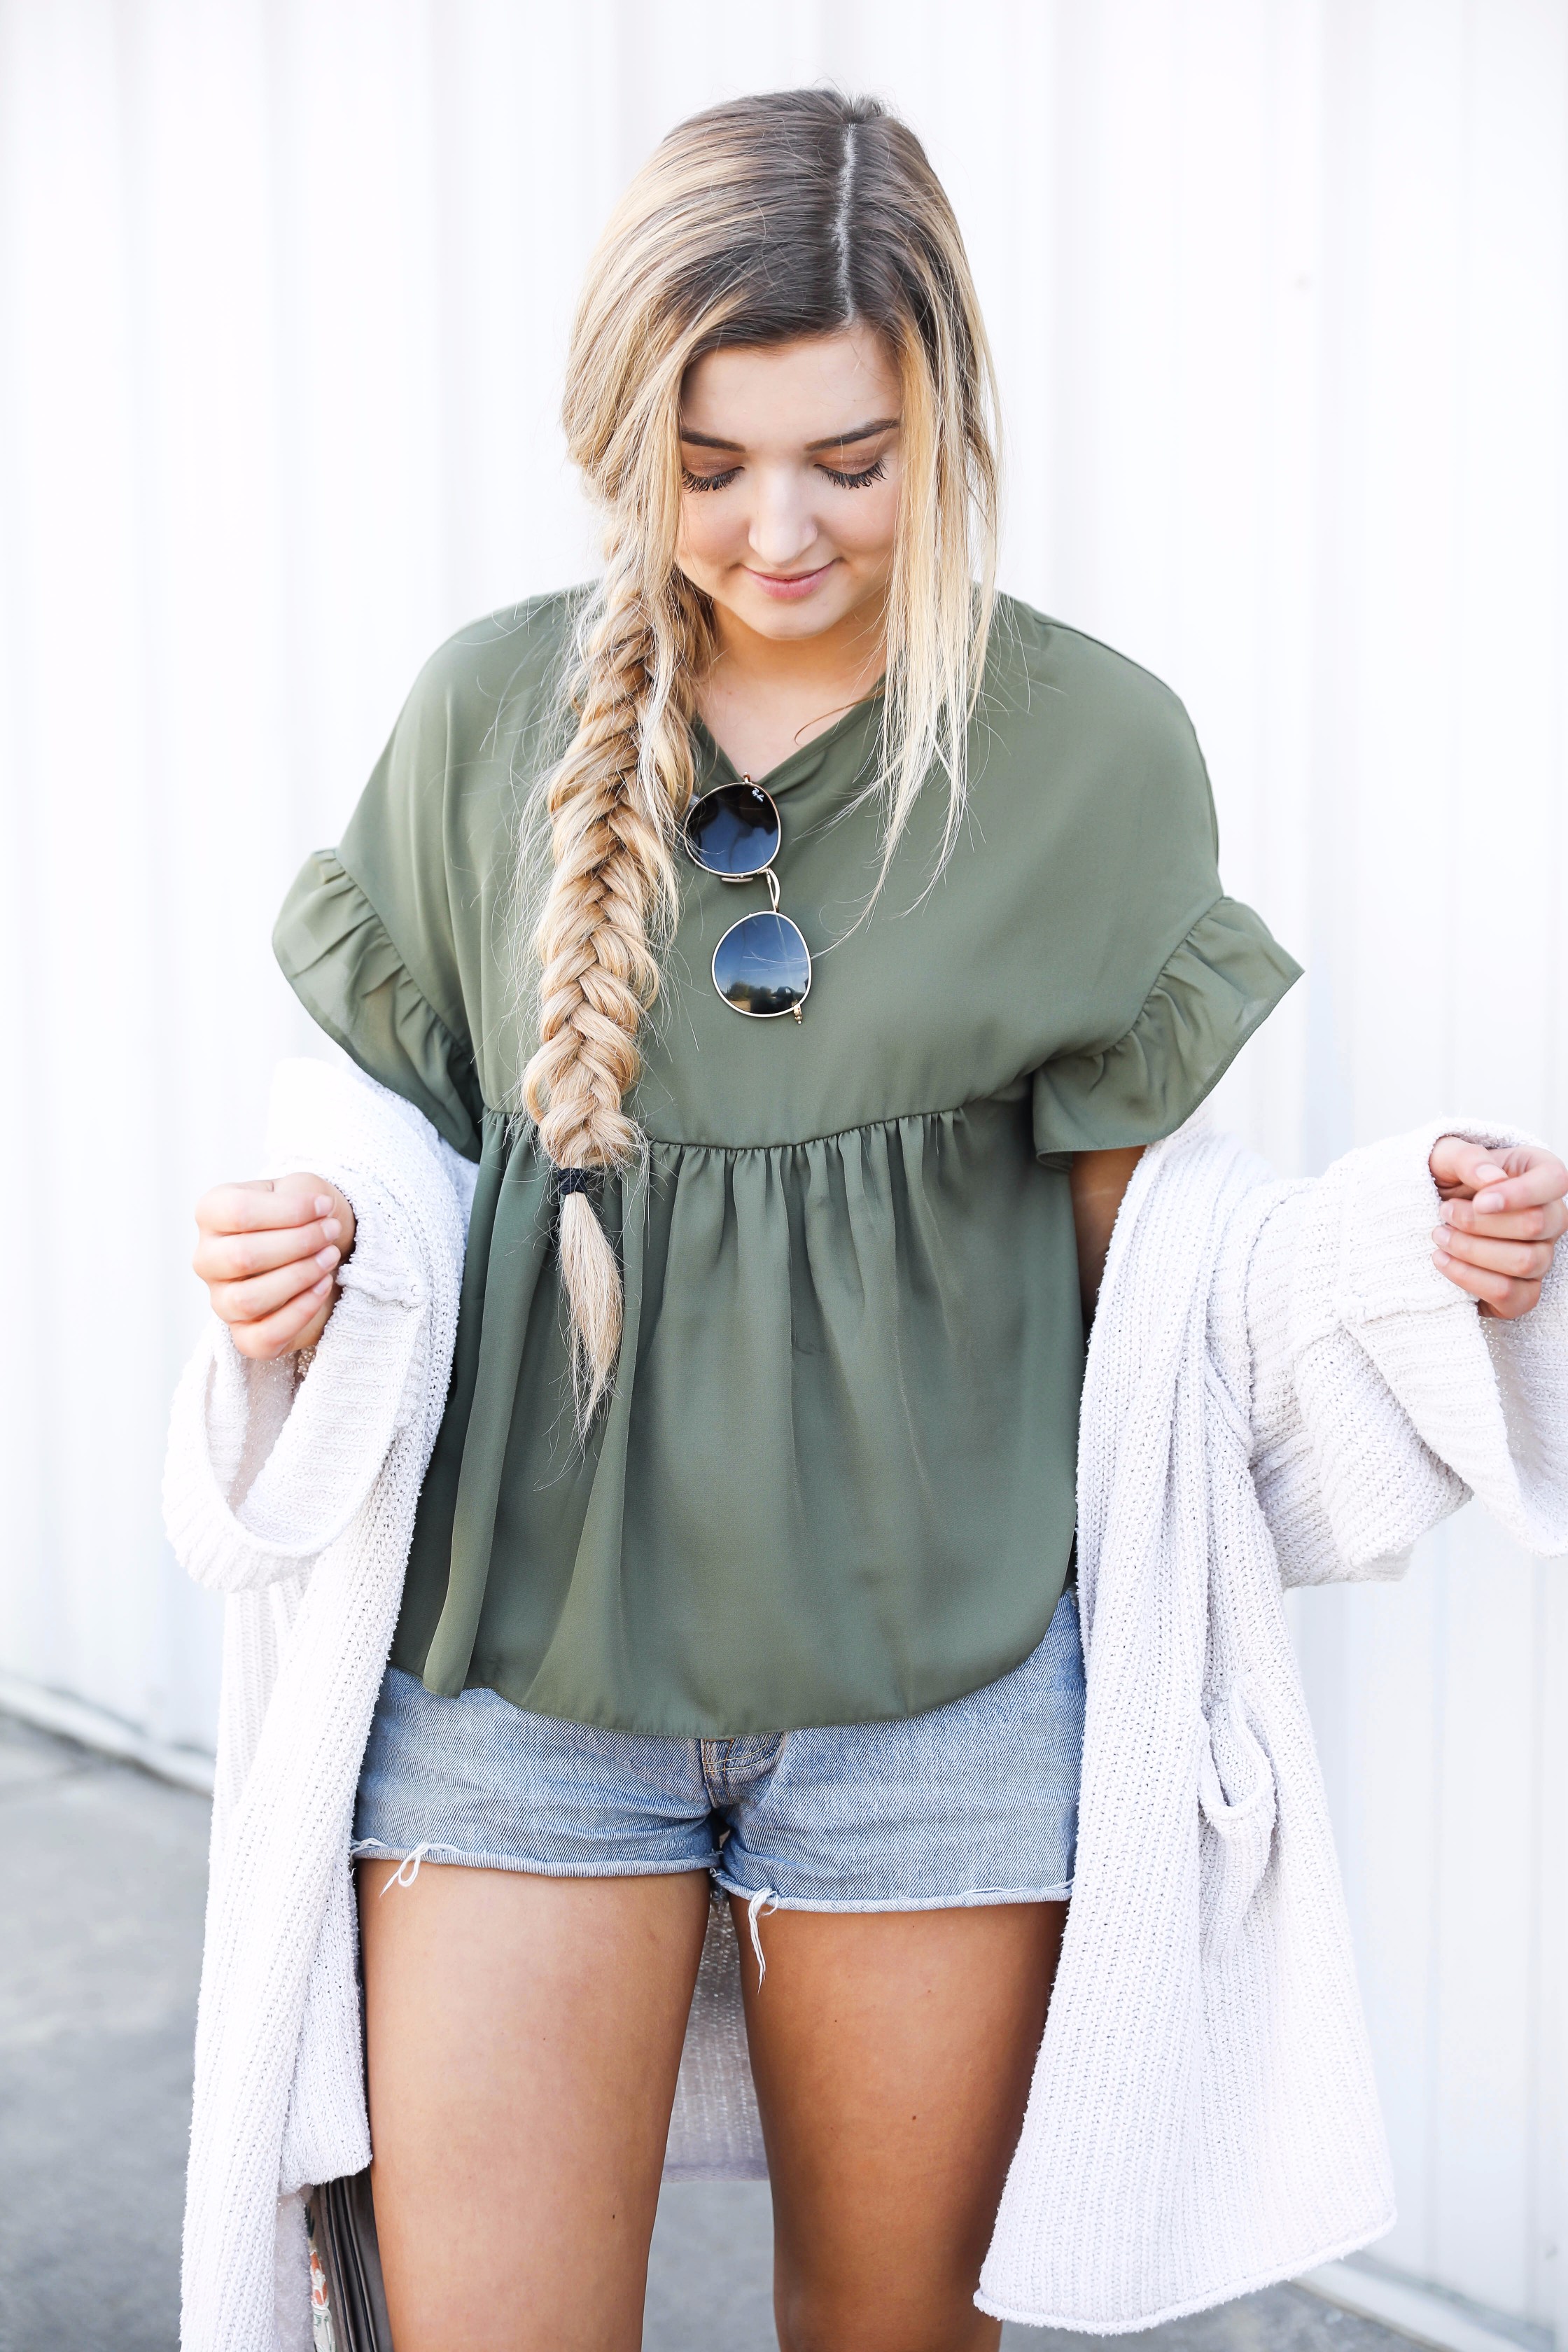 Olive ruffle top with a free people slouchy cardigan! I love olive for fall. This look is autumn perfection with the booties! Find the details on fashion blog daily dose of charm by lauren lindmark